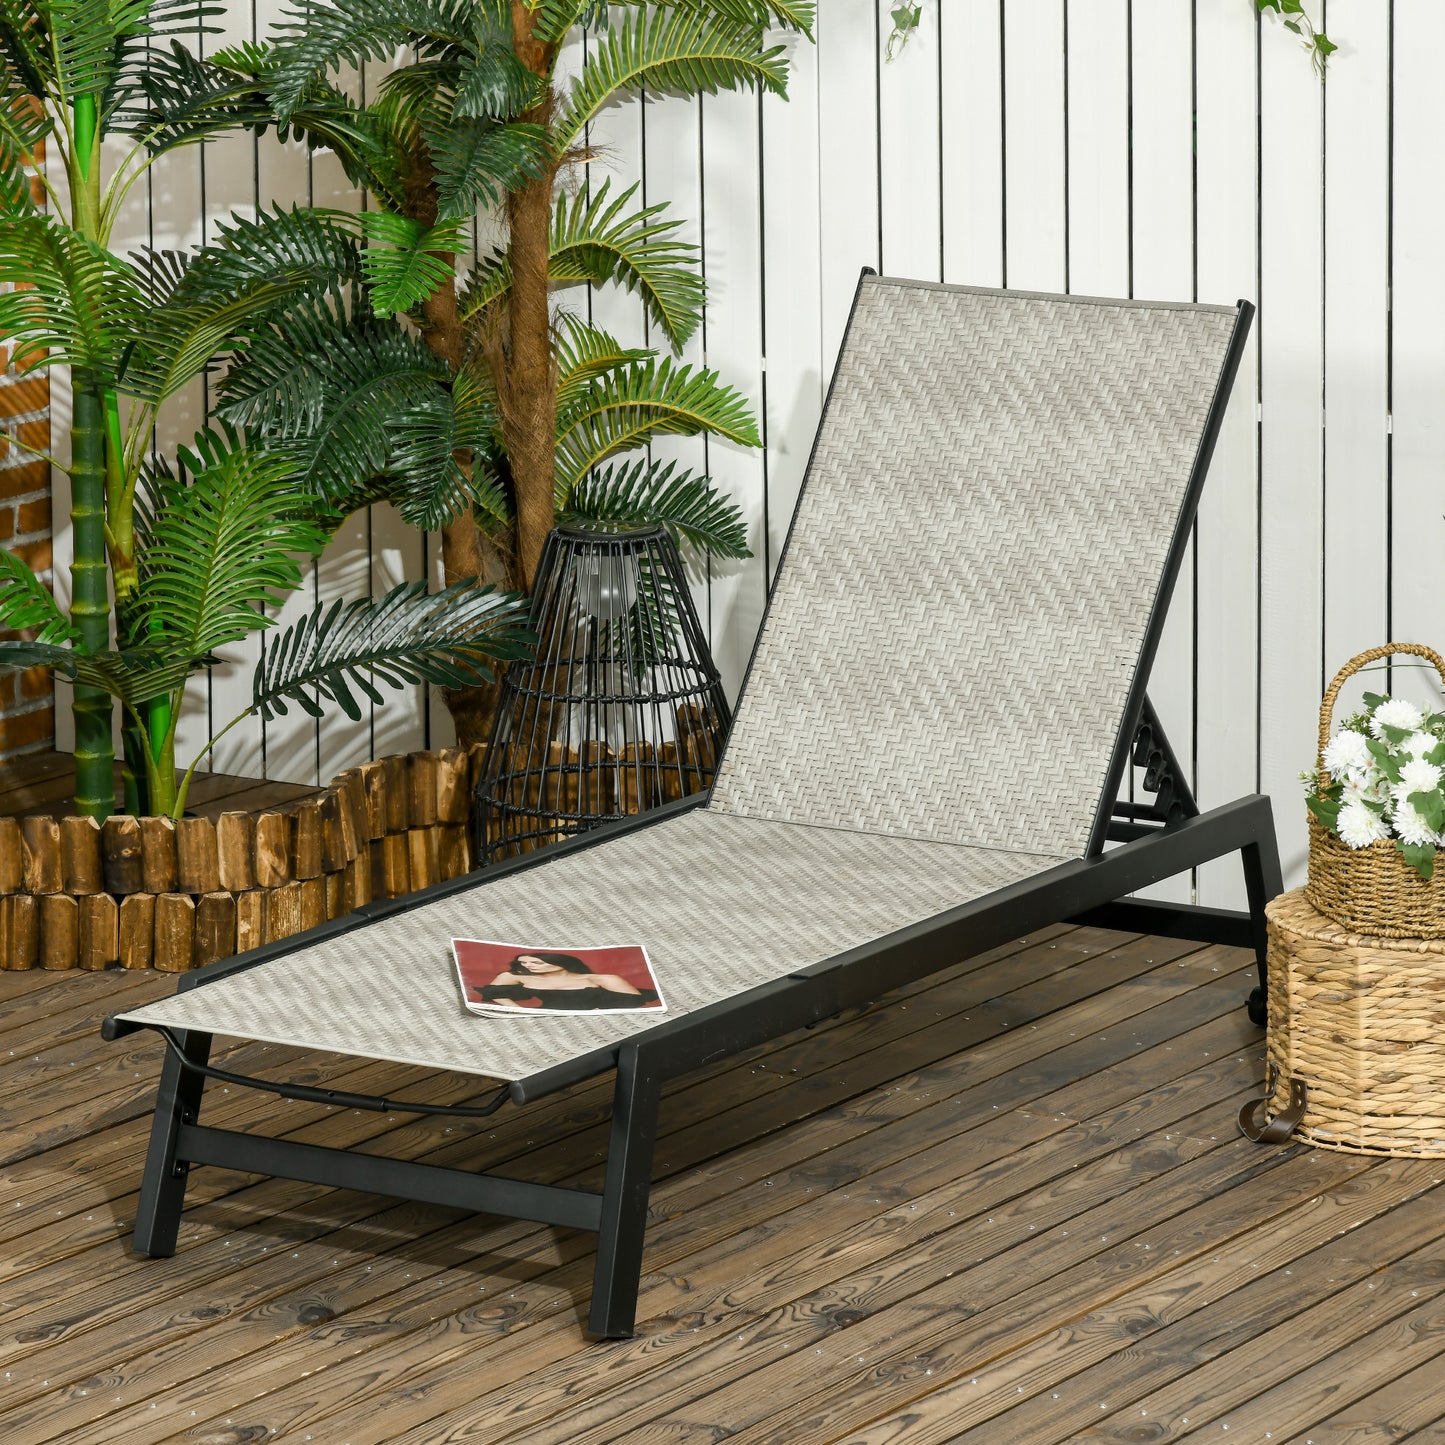 Outsunny Outdoor PE Rattan Sun Loungers, Patio Wicker Chaise Lounge Chair with 5-Position Backrest, Wheels for Sun Room, Garden, Poolside, Black